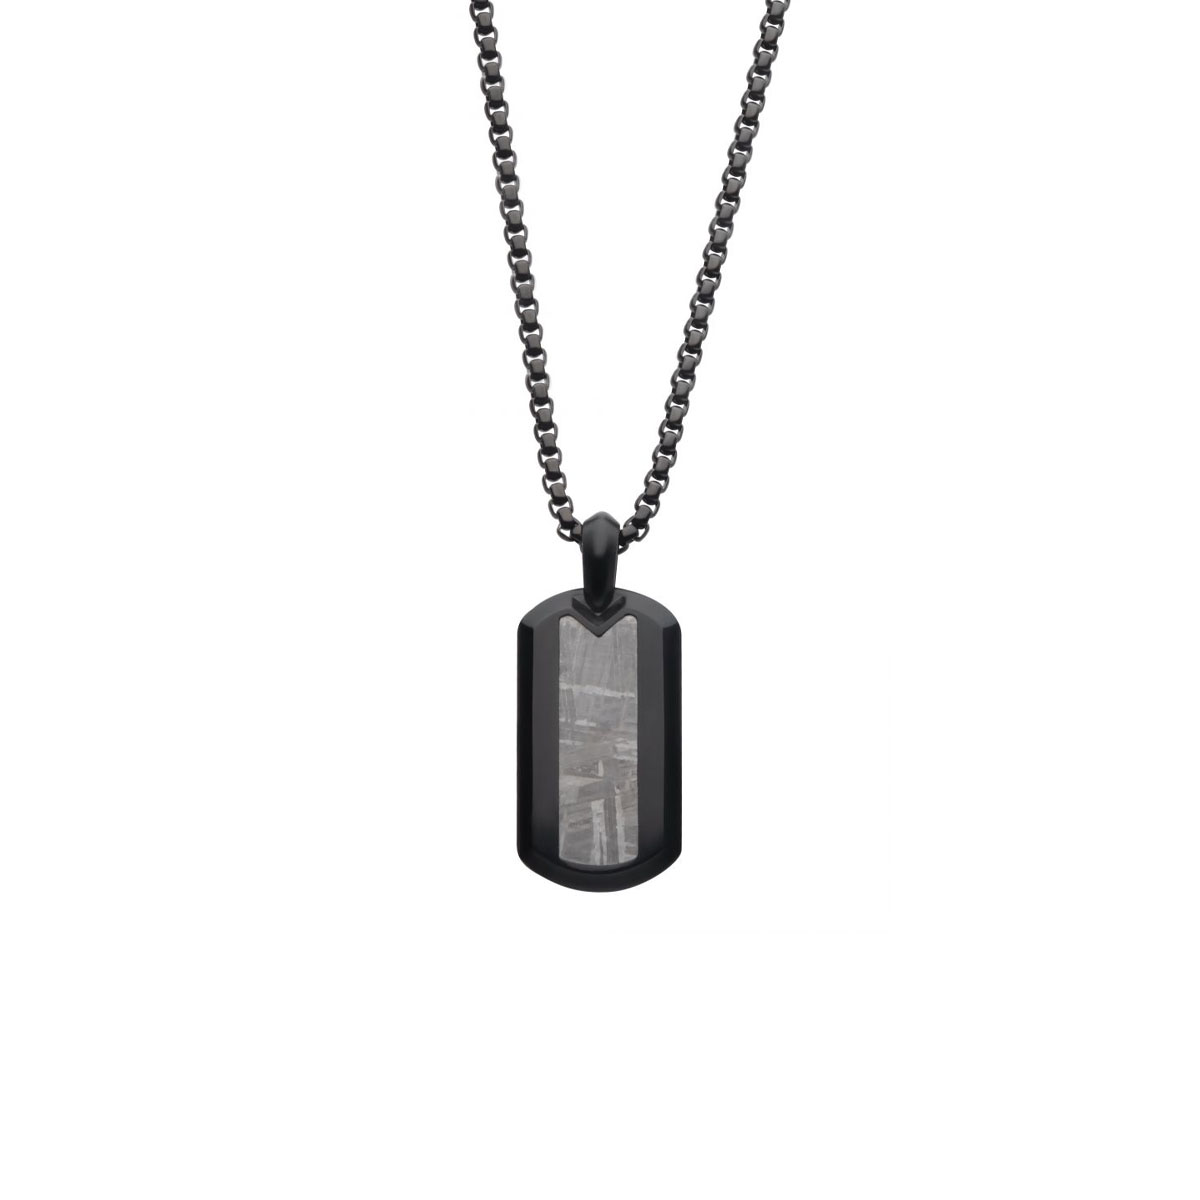 Black Stainless Steel Meteorite Pendant with Chain